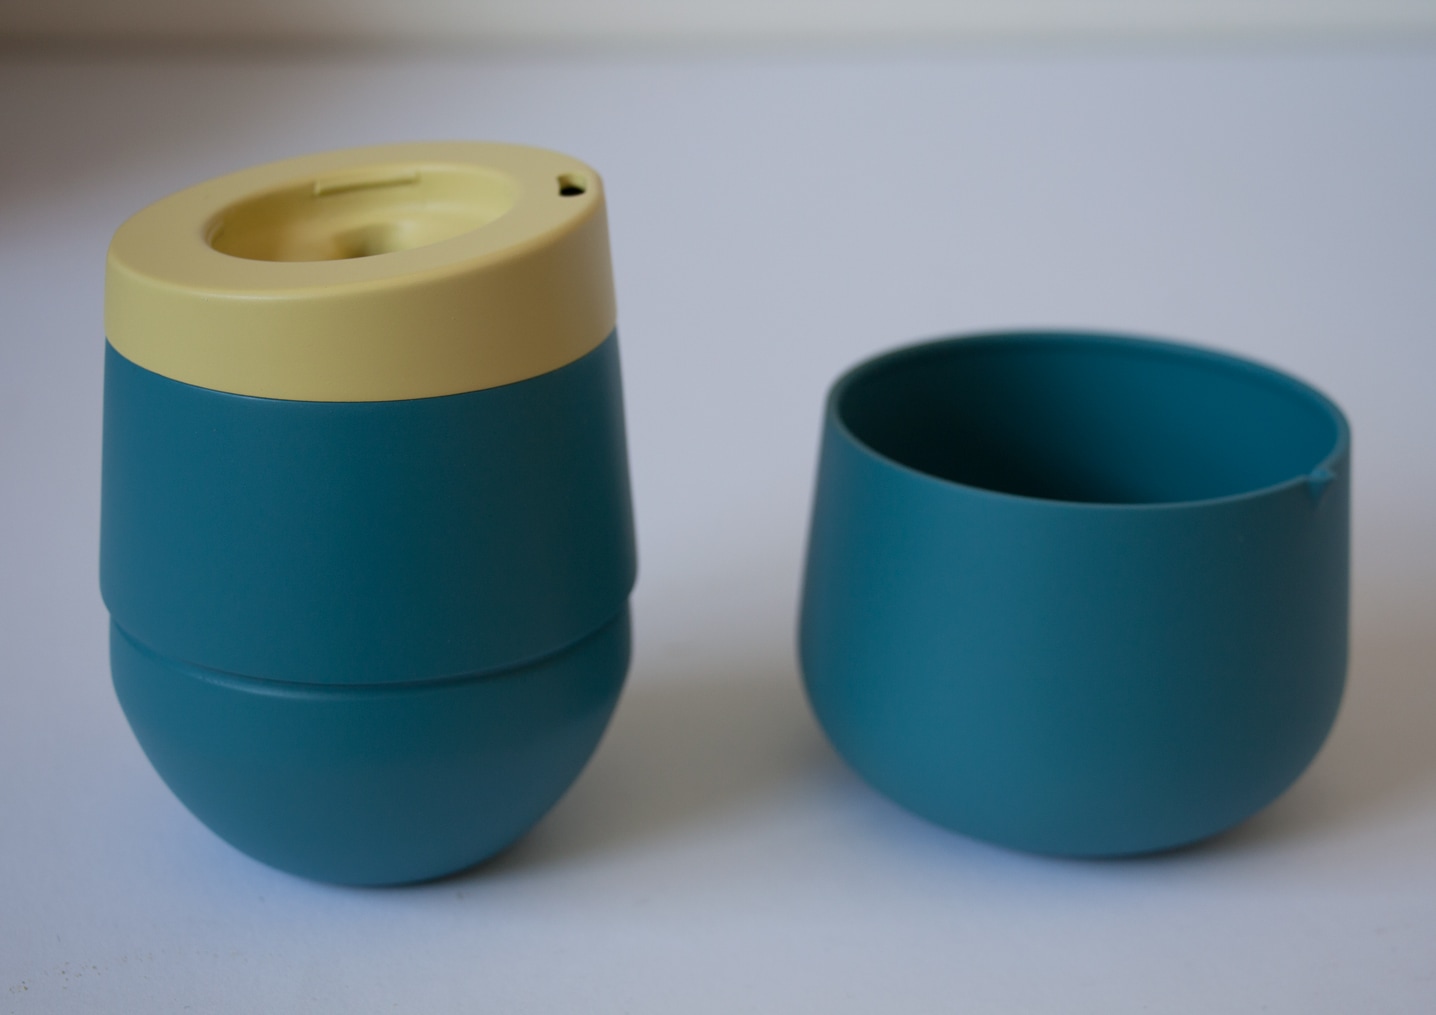 Mobilitea reusable tea cup separated top and bottom parts